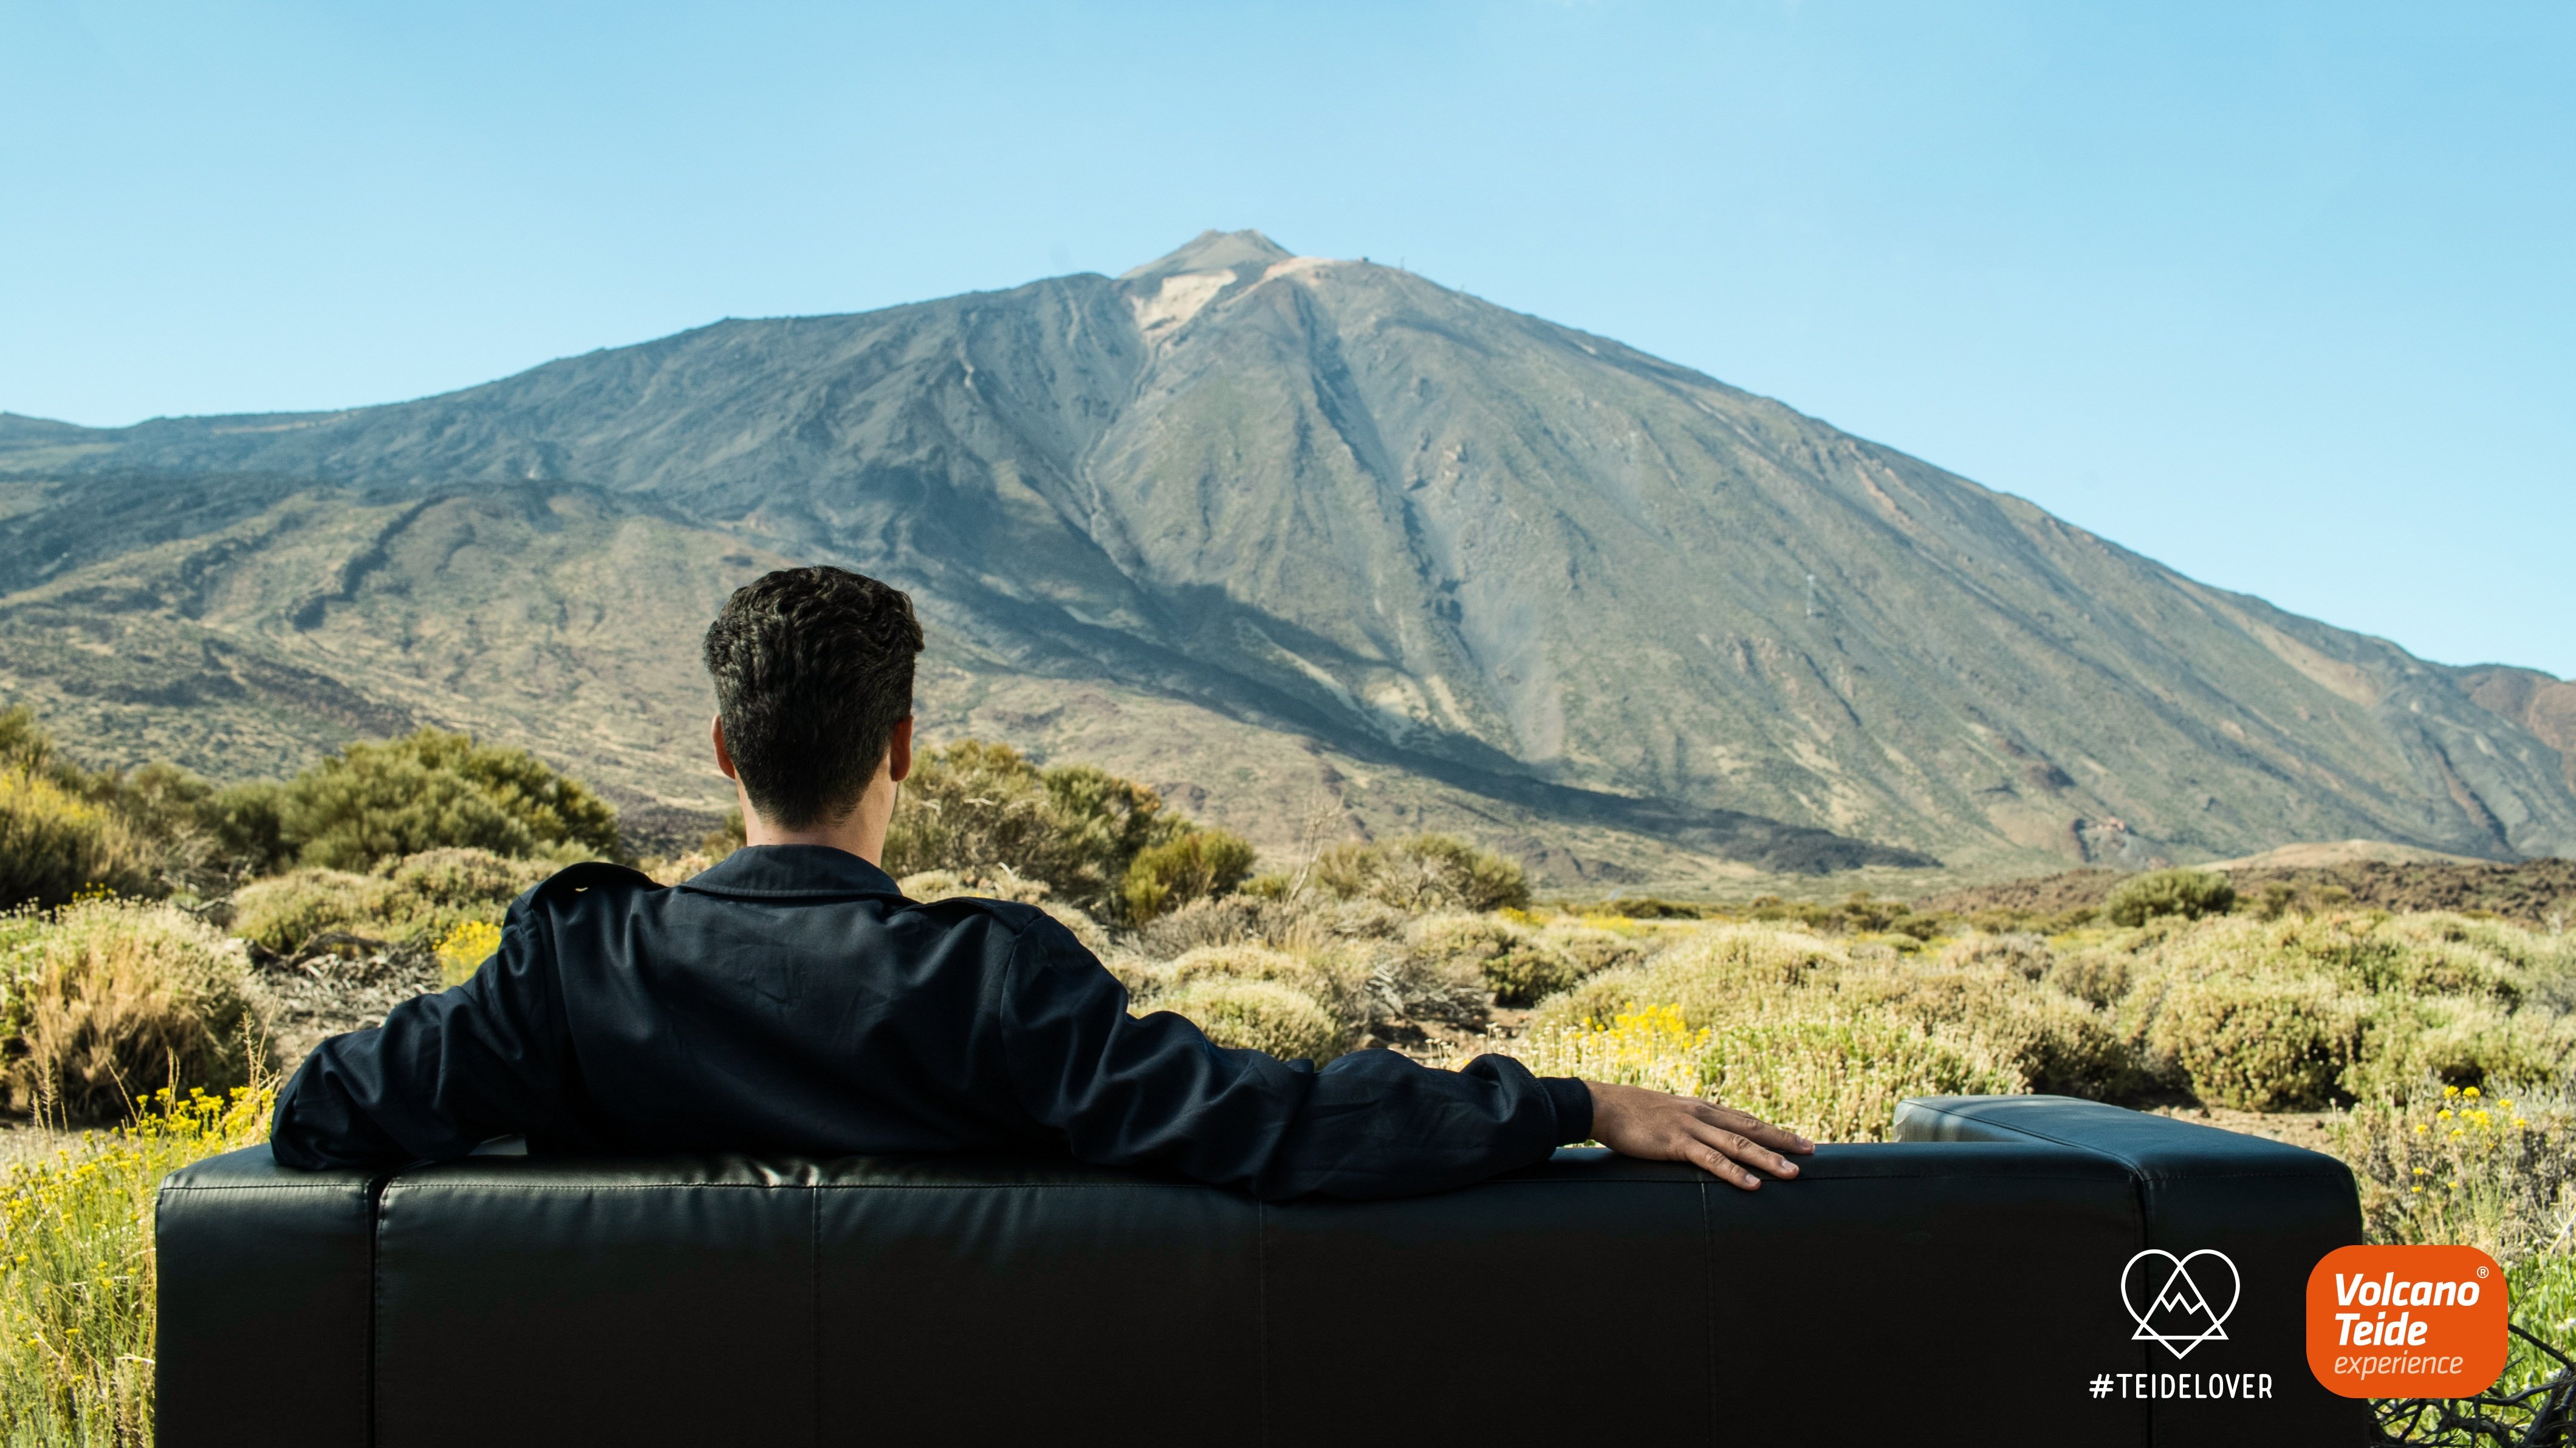 Activities and excursions on Teide: visual weekly calendar